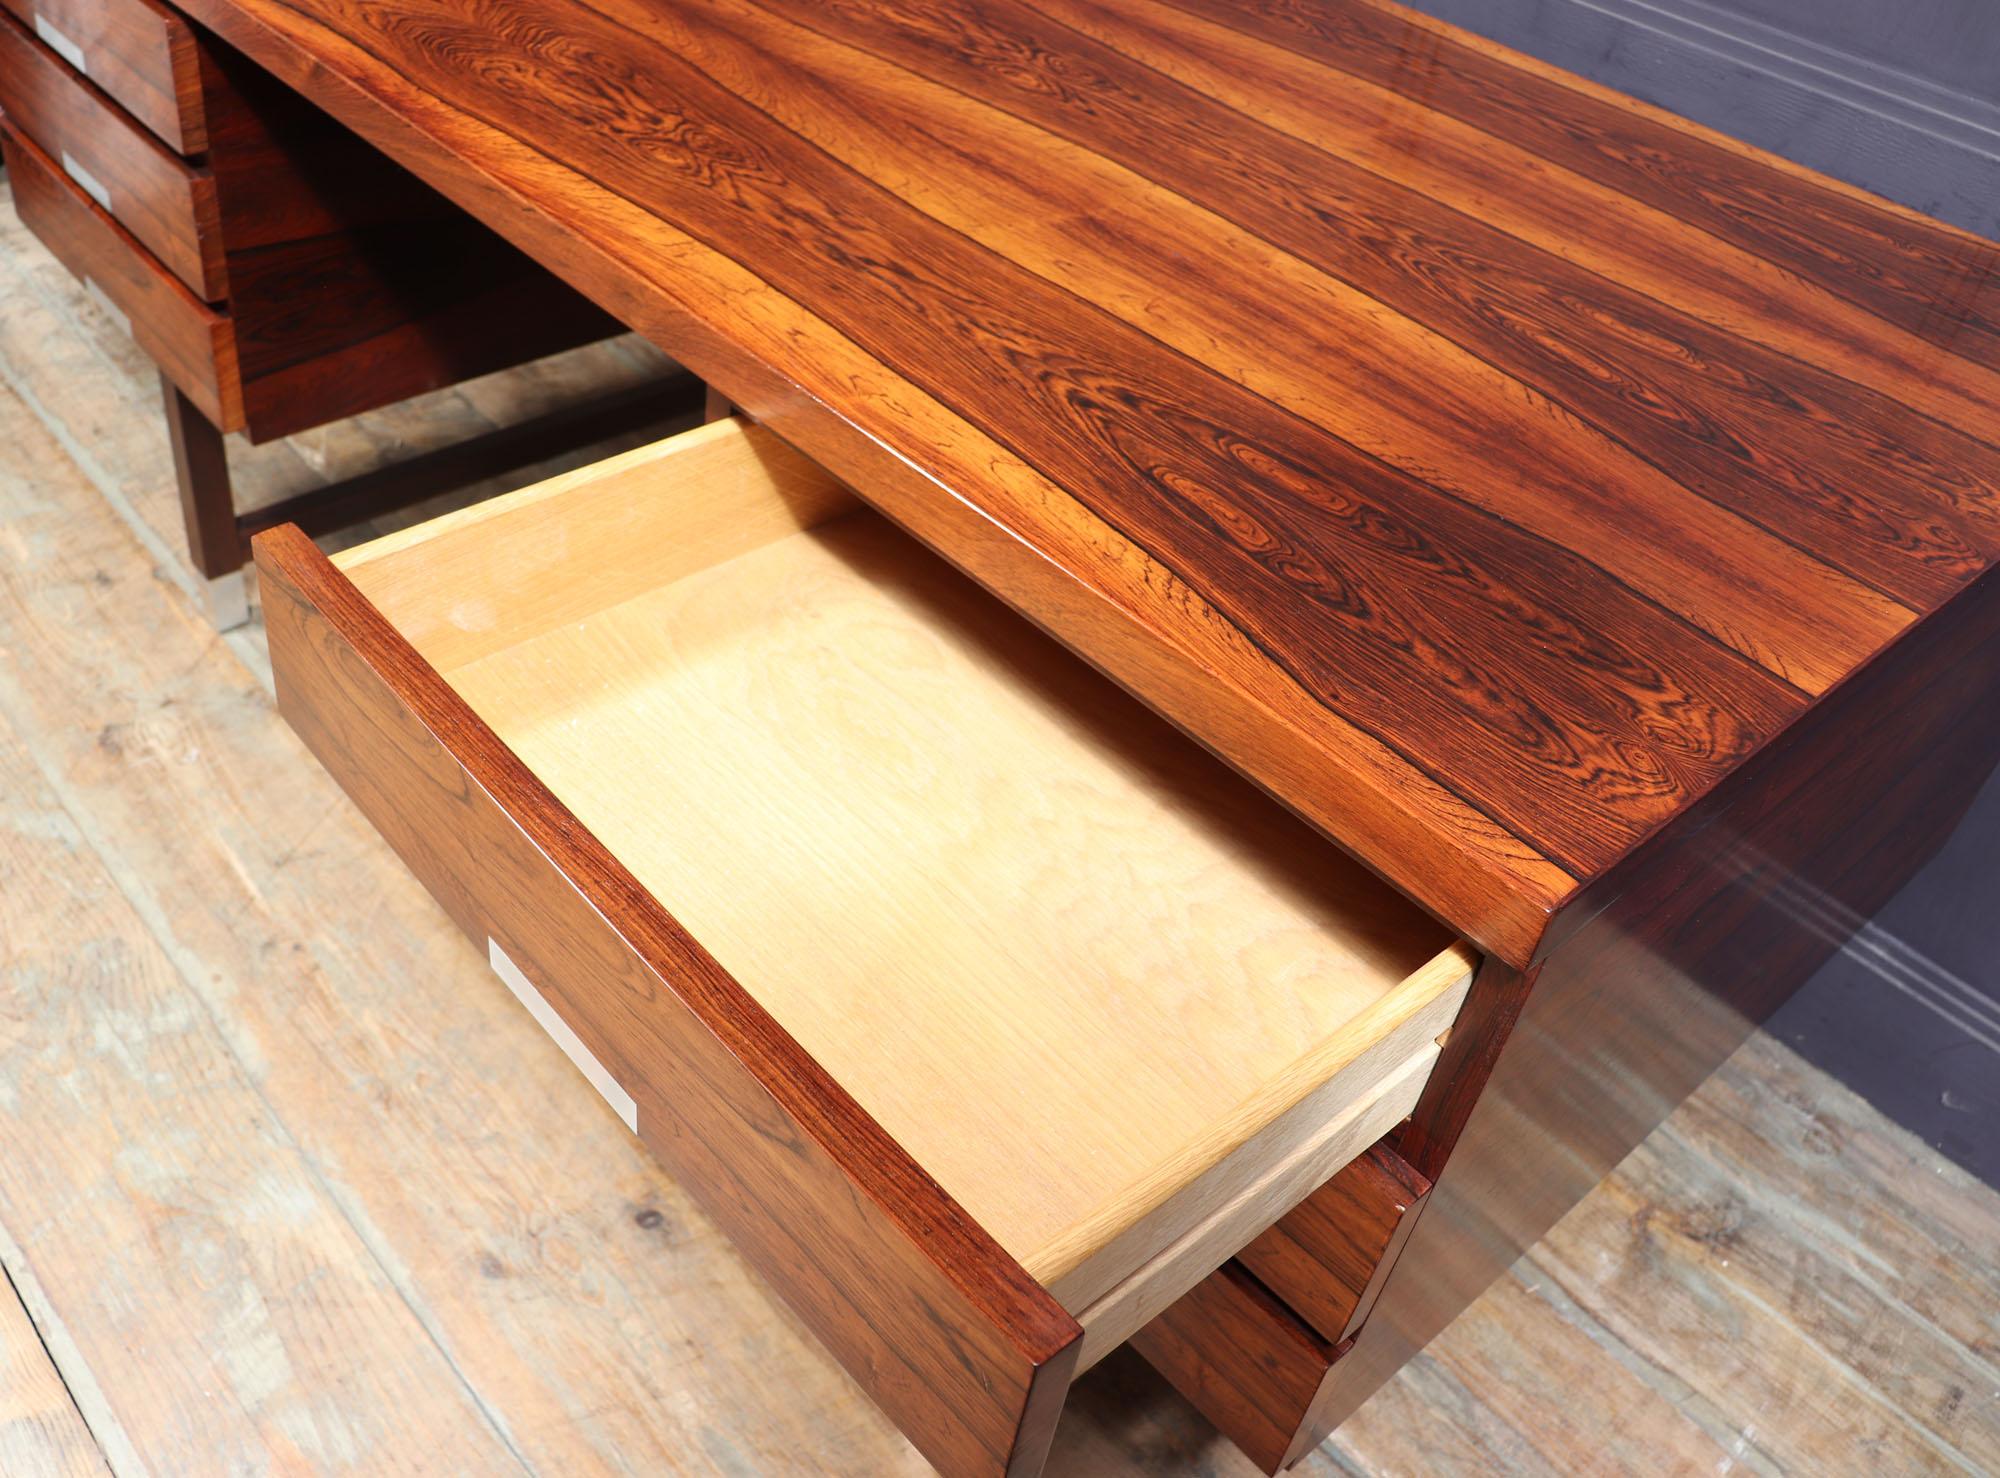 Midcentury desk EP401
A freestanding desk manufactured by Eigil Pedersen in Denmark in the 1960s is made from rosewood and has a large rectangular top with 6 drawers standing upon formed legs with aluminium tipped feet and drawer handles. The